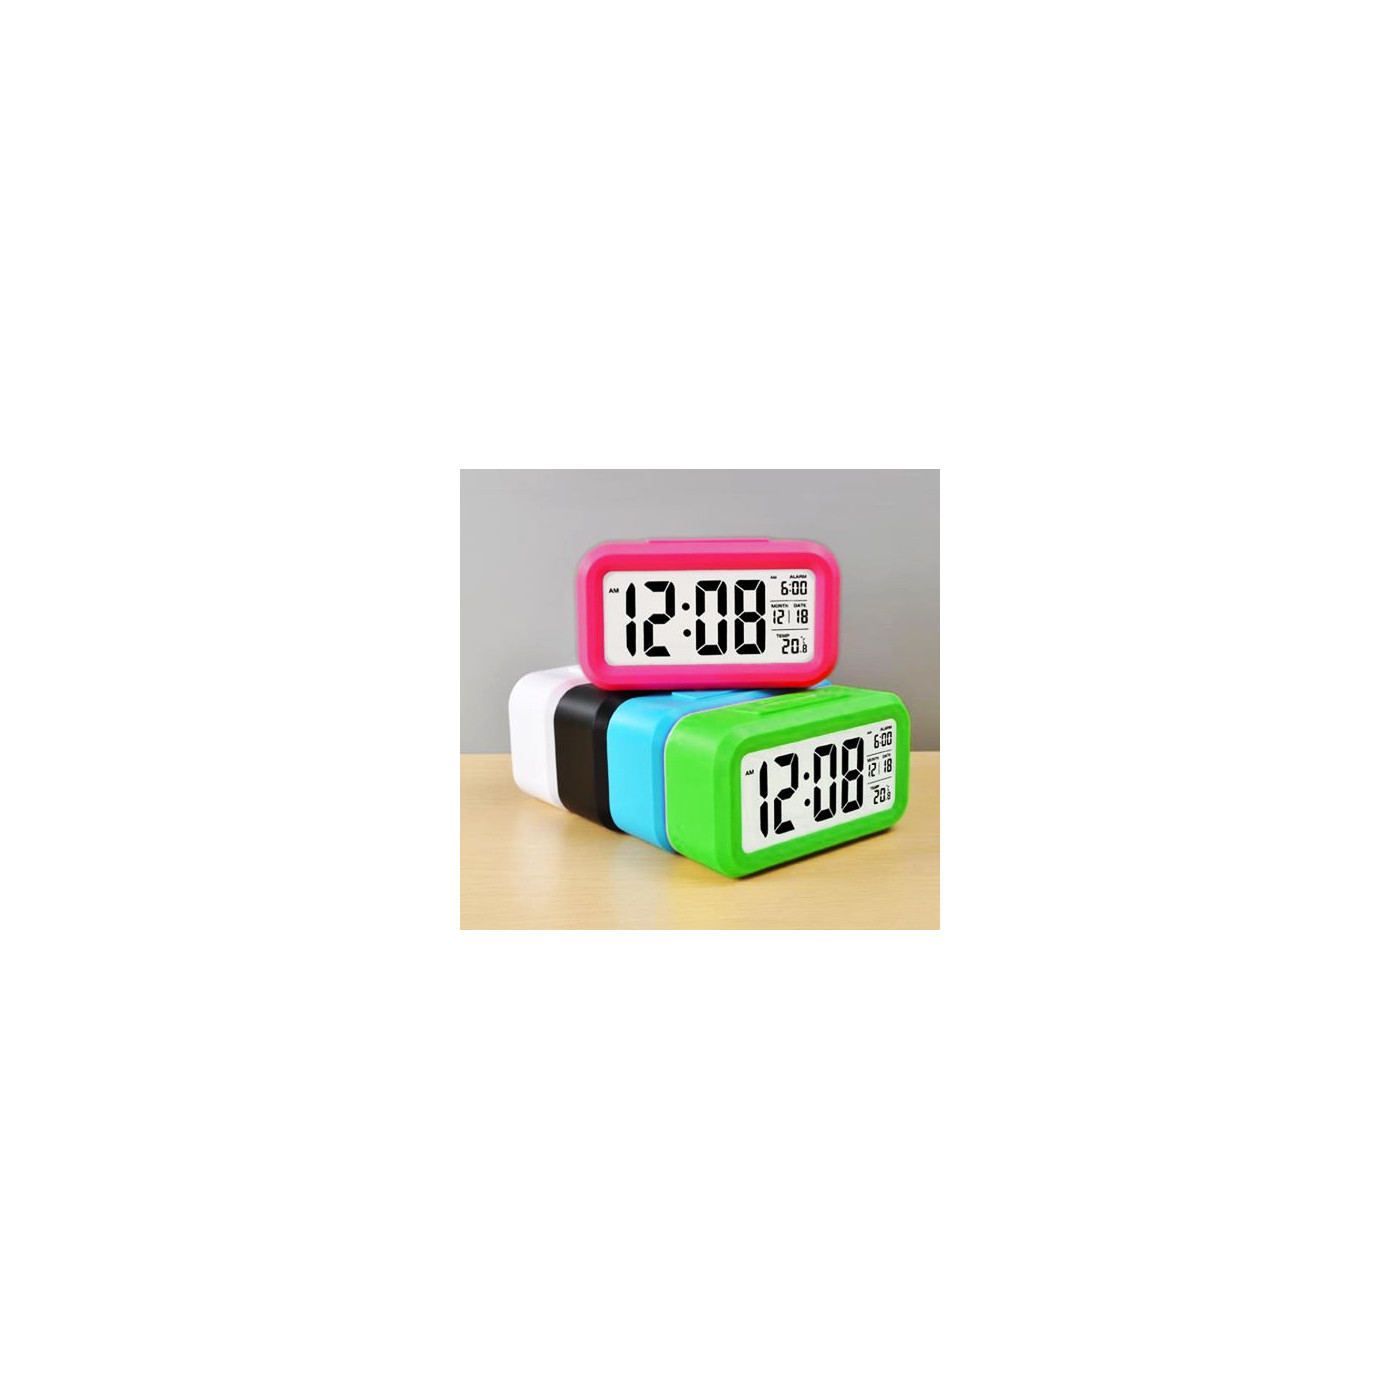 Clock with alarm in cheerful color: white